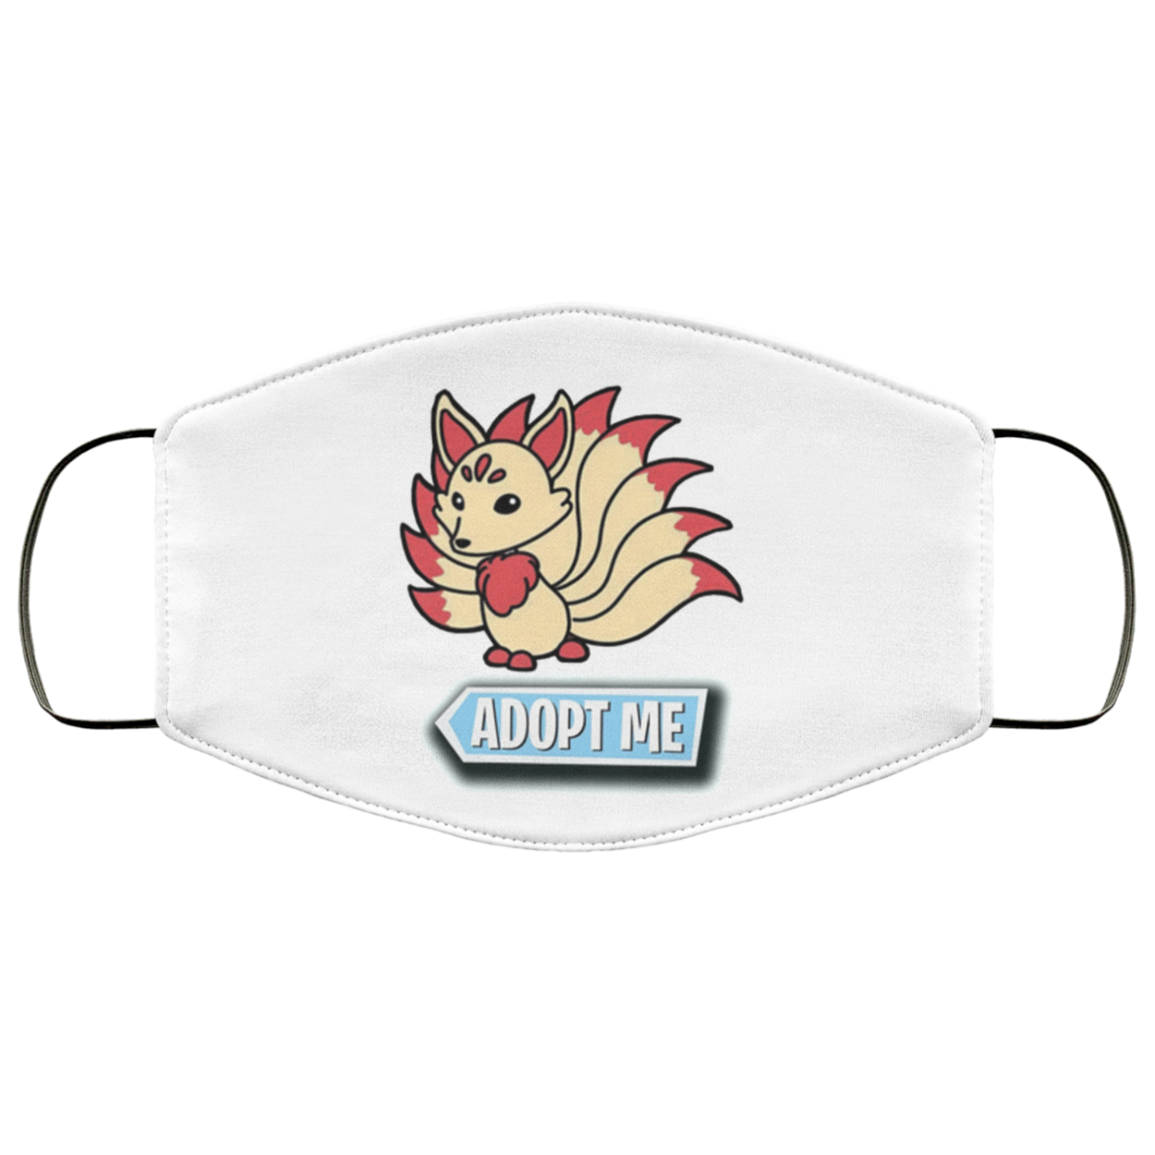 Kitsune Adopt Me Roblox Roblox Game Adopt Me Characters Face Mask Q Finder Trending Design T Shirt - roblox adopt me kitsune in real life